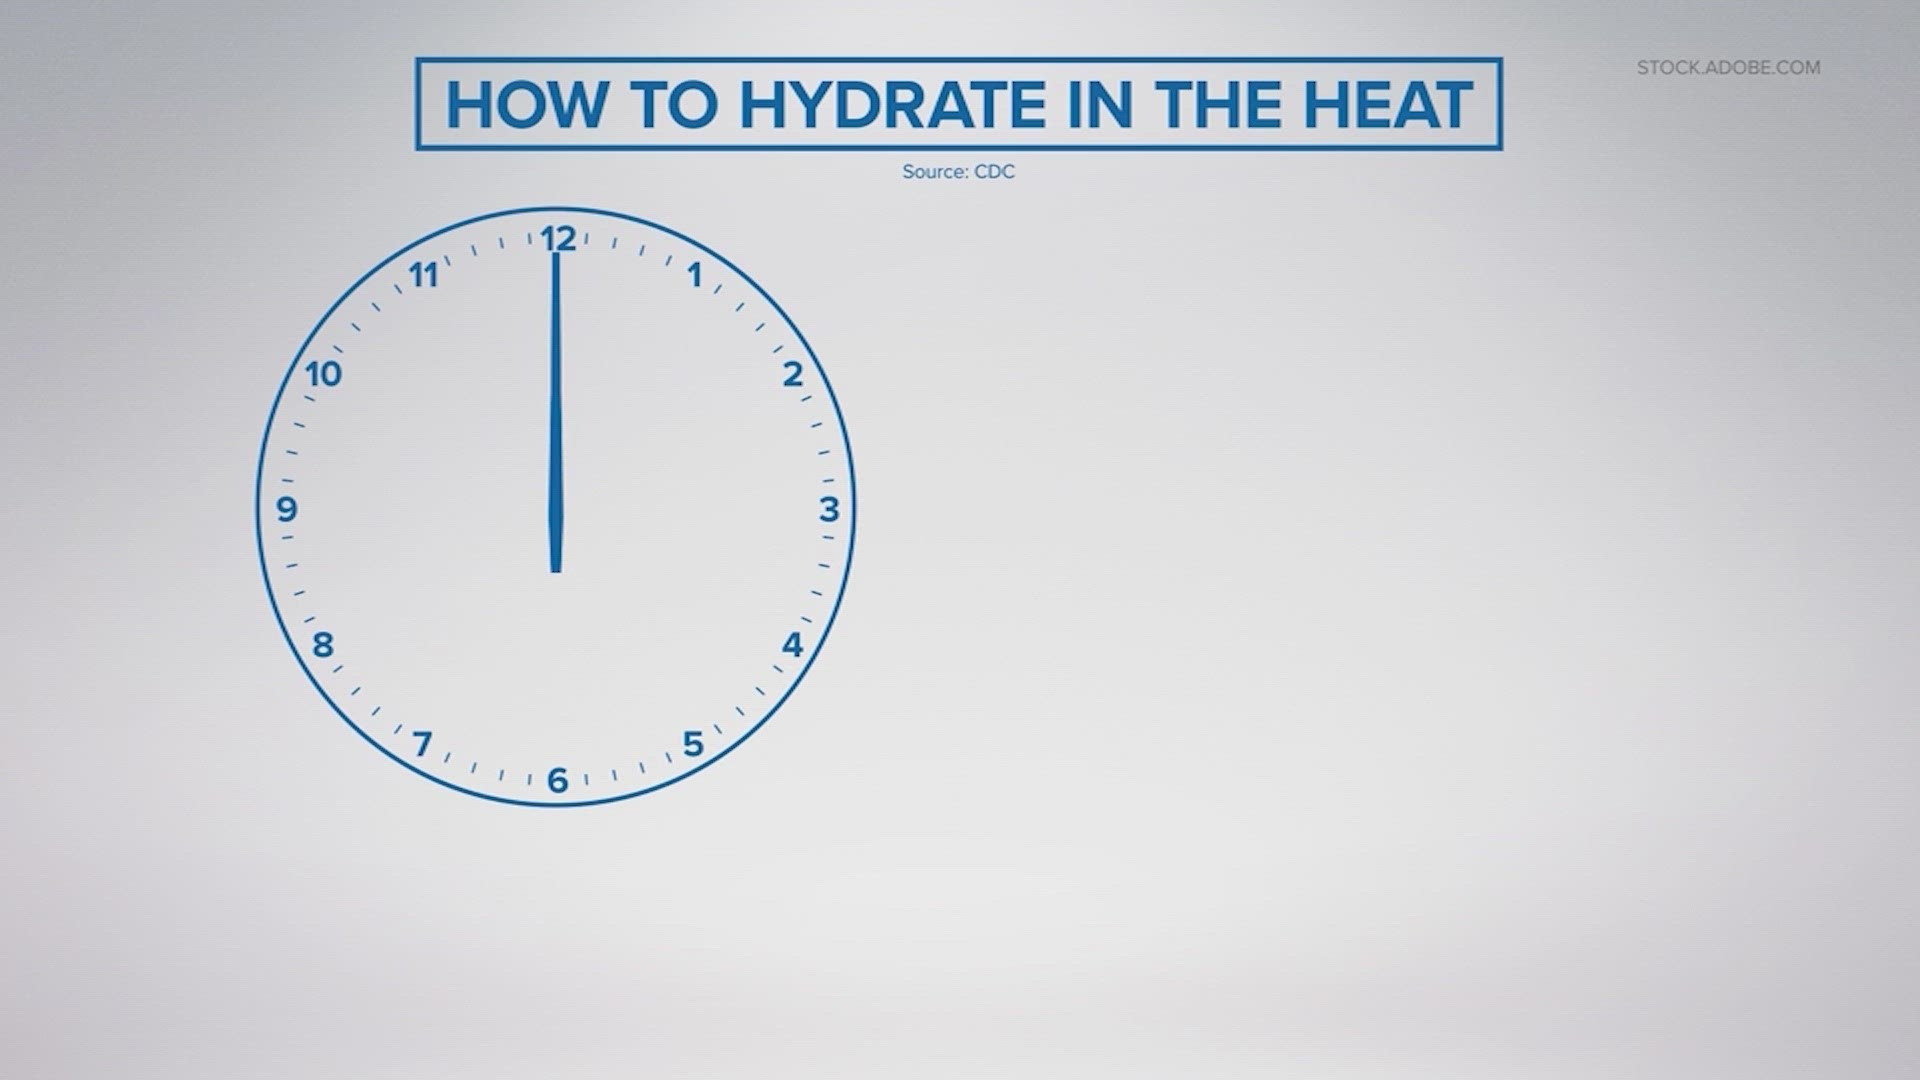 Hydration is always important, but during triple-digit weather in South Texas it can mean the difference between safety and heat exhaustion.